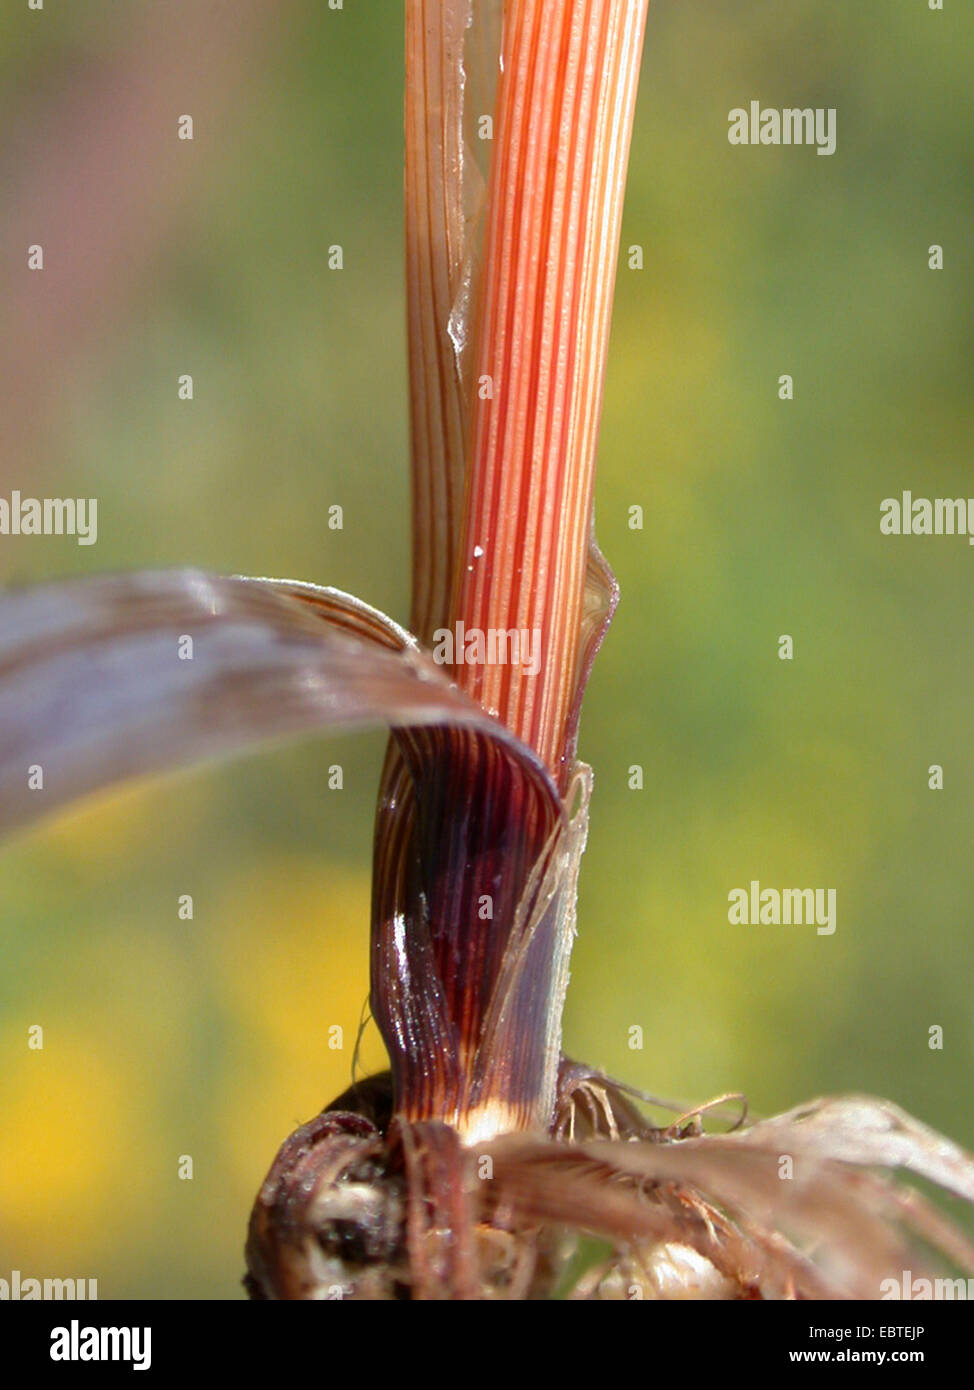 spiked sedge (Carex spicata), red leaf blades, Germany Stock Photo